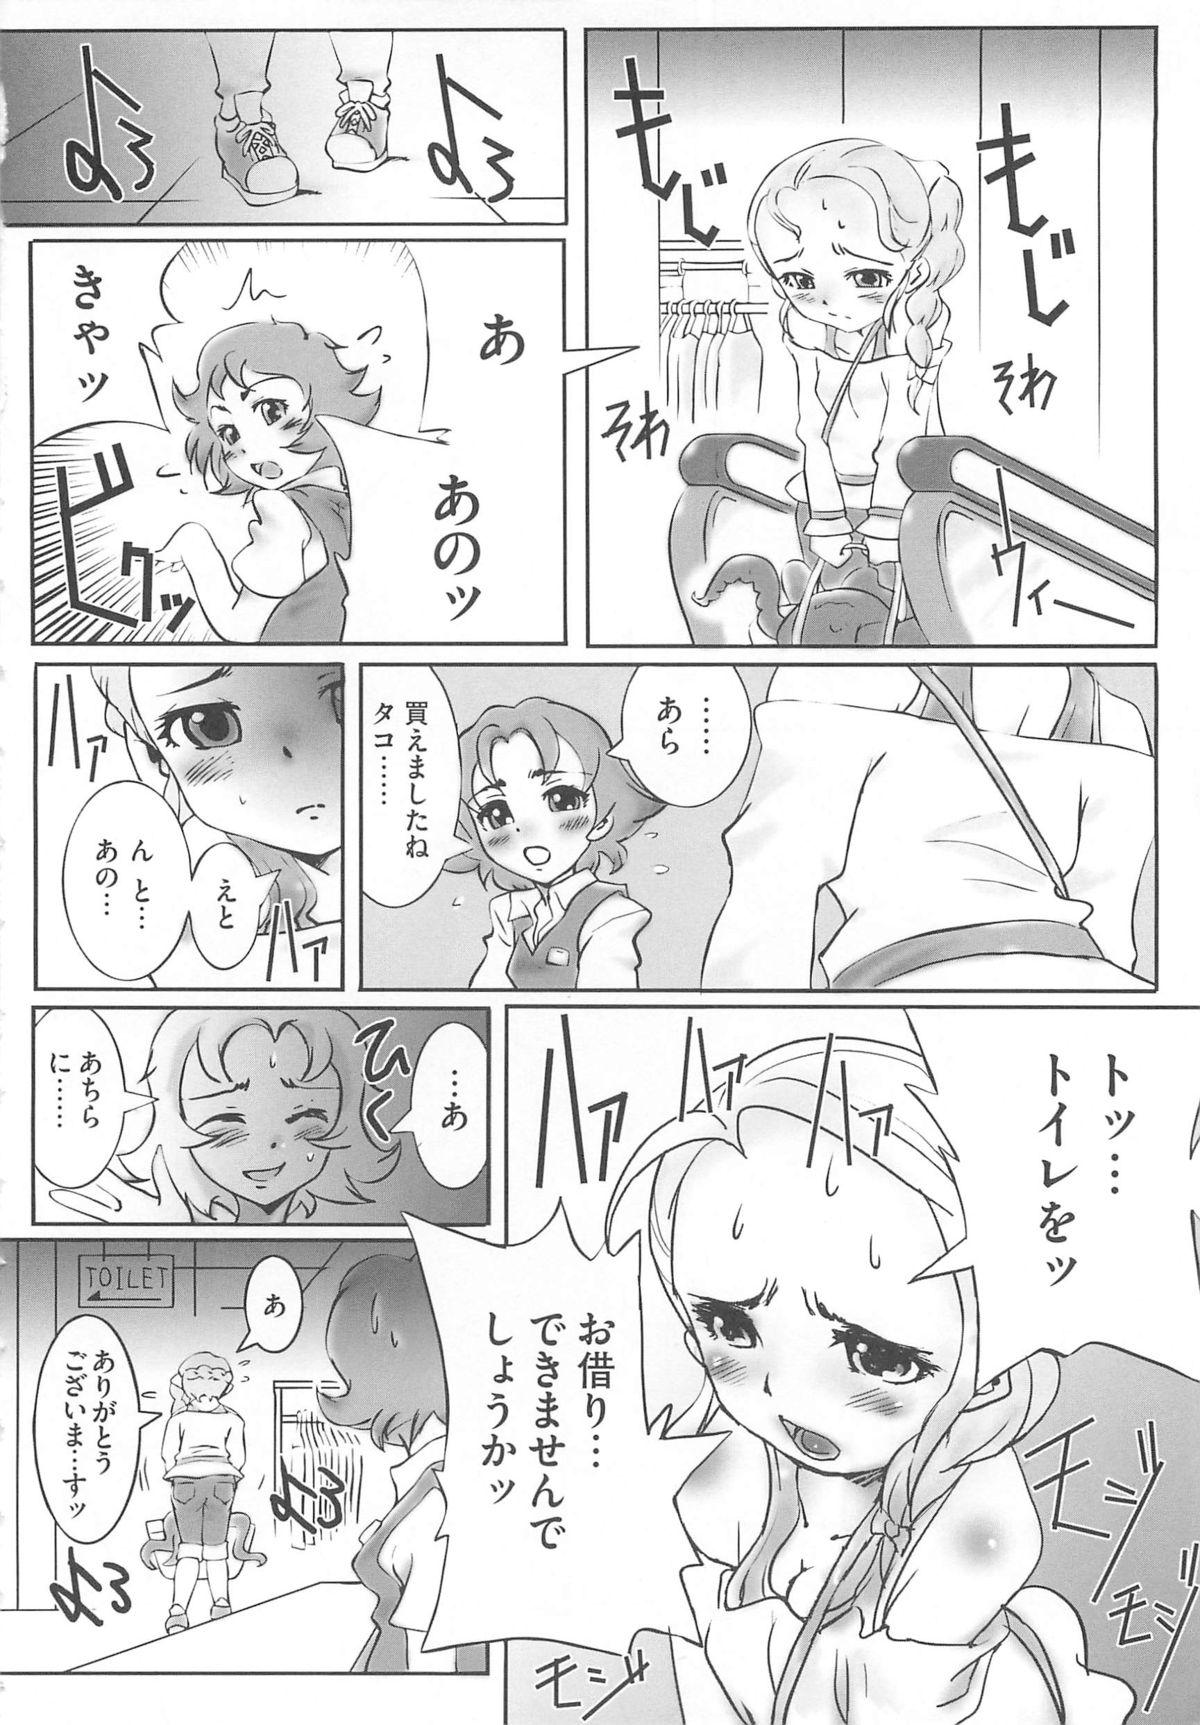 First Time Erocure MAX - Futacure Max H - Pretty cure Thylinh - Page 11